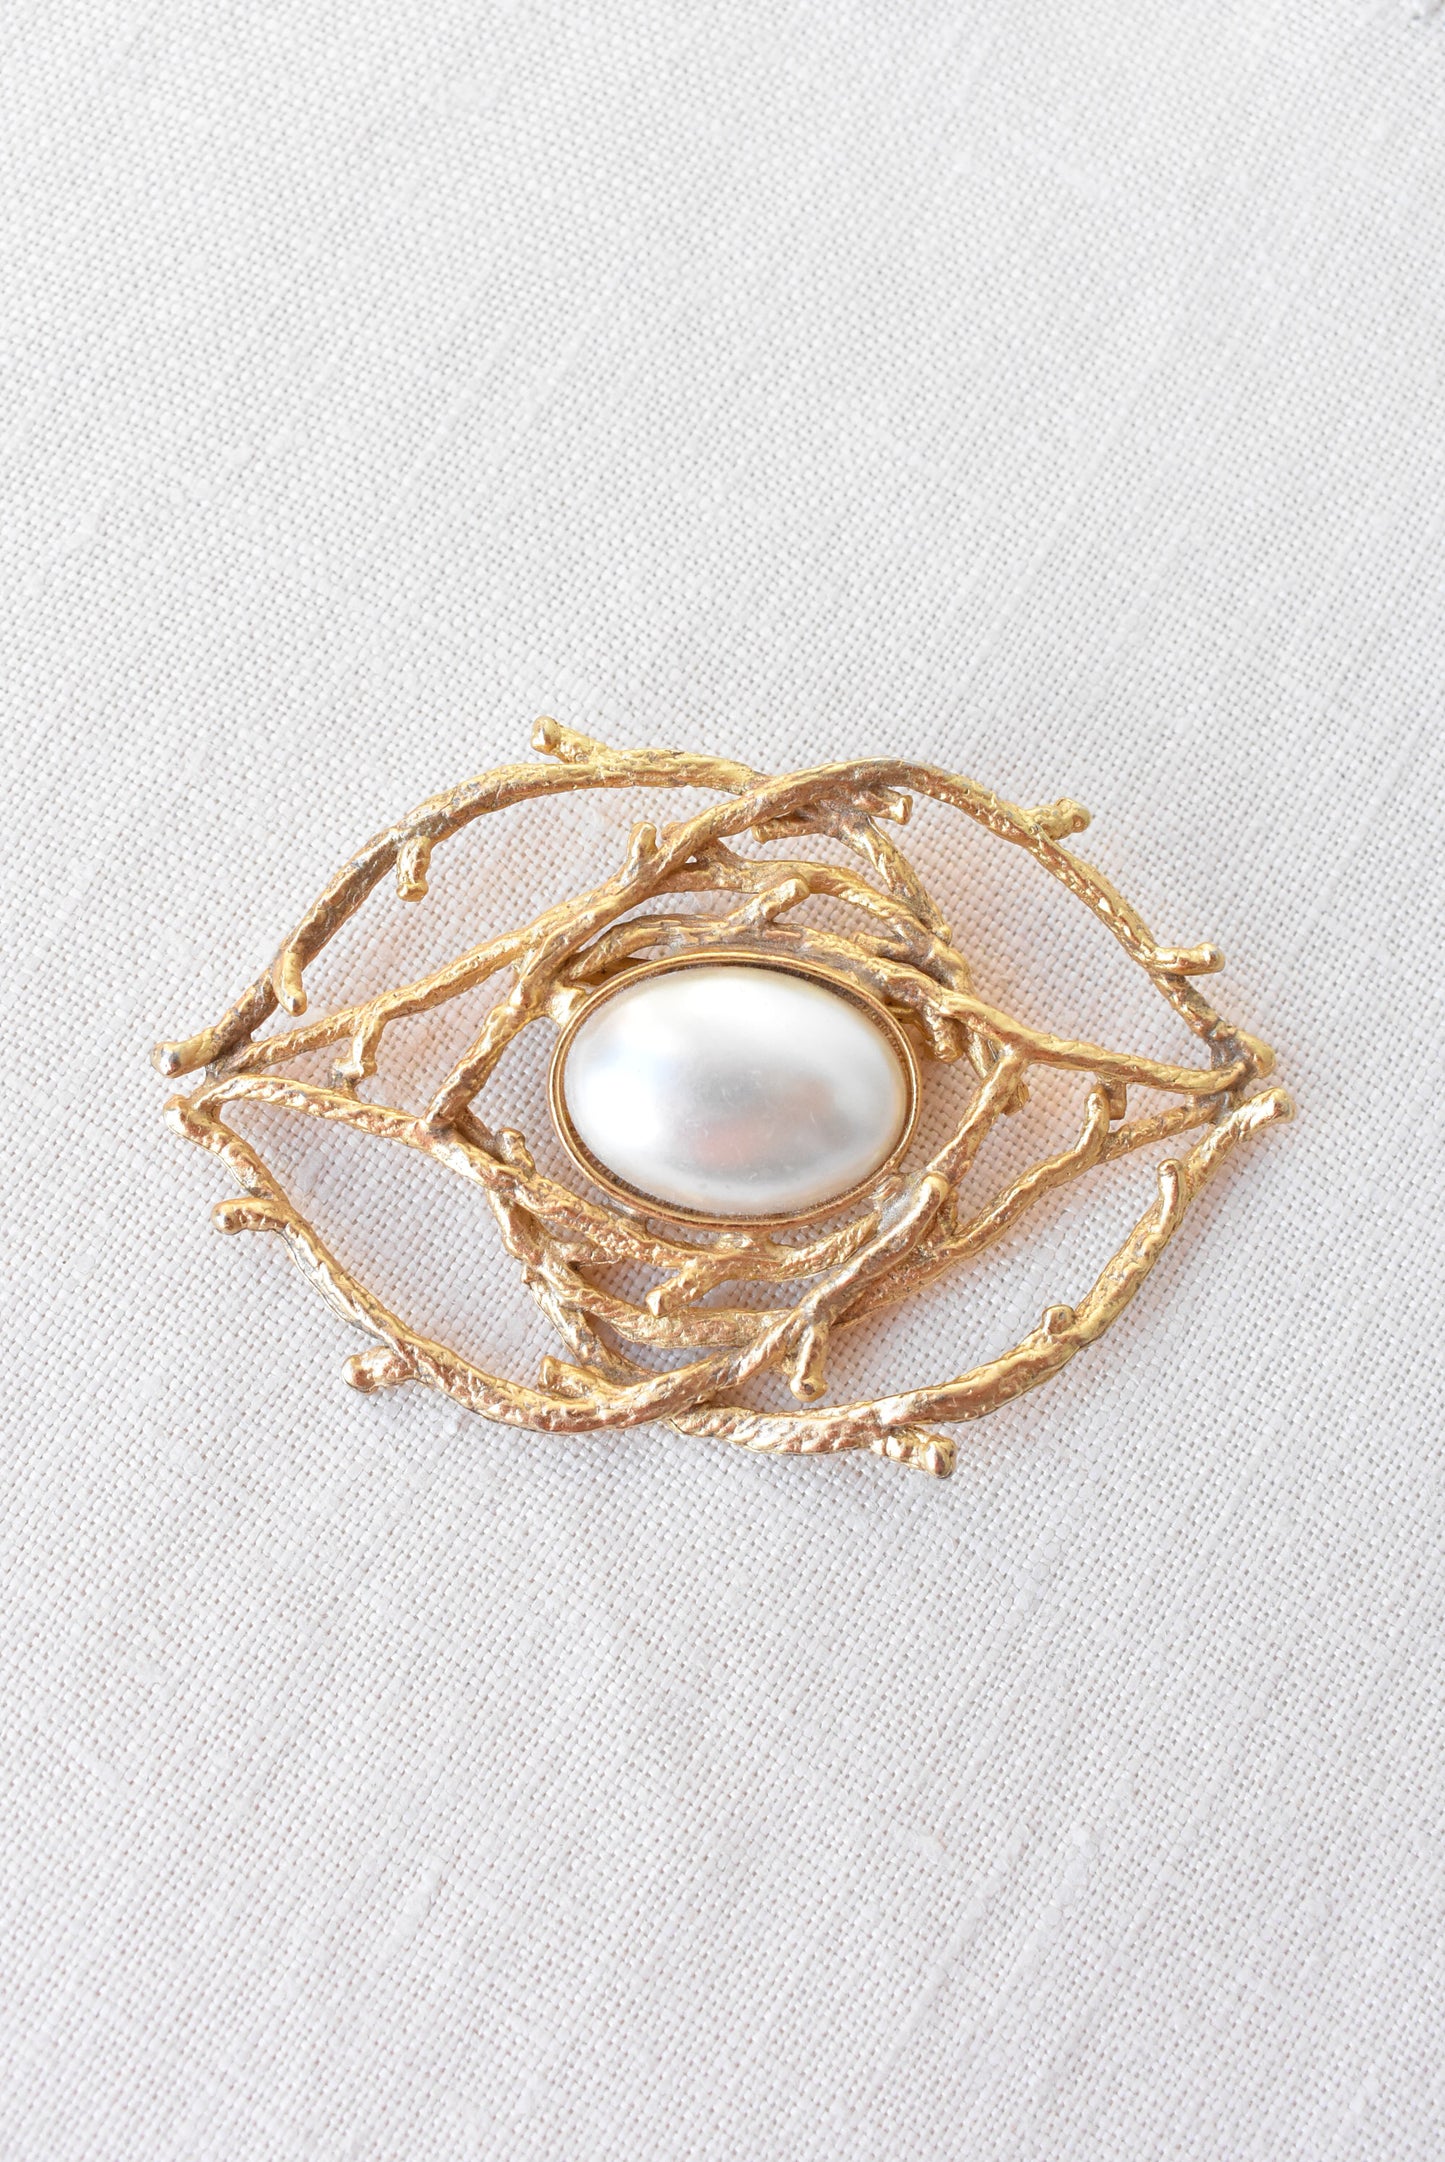 Retro 80's gold and pearl large brooch